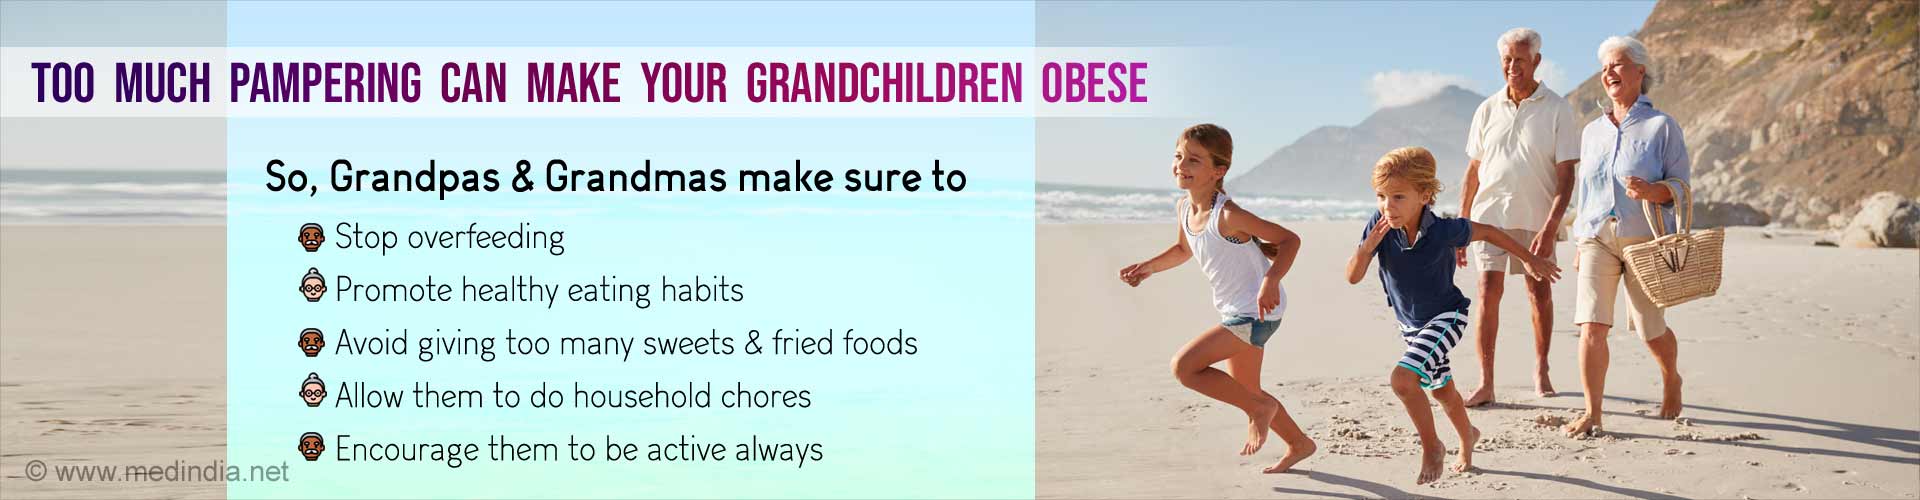 Too much pampering can make your grandchildren obese. So, Grandpas & Grandmas make sure to stop overfeeding, promote healthy eating habits, avoid giving too many sweets & fried foods, allow them to do household chores and encourage them to be active always.
